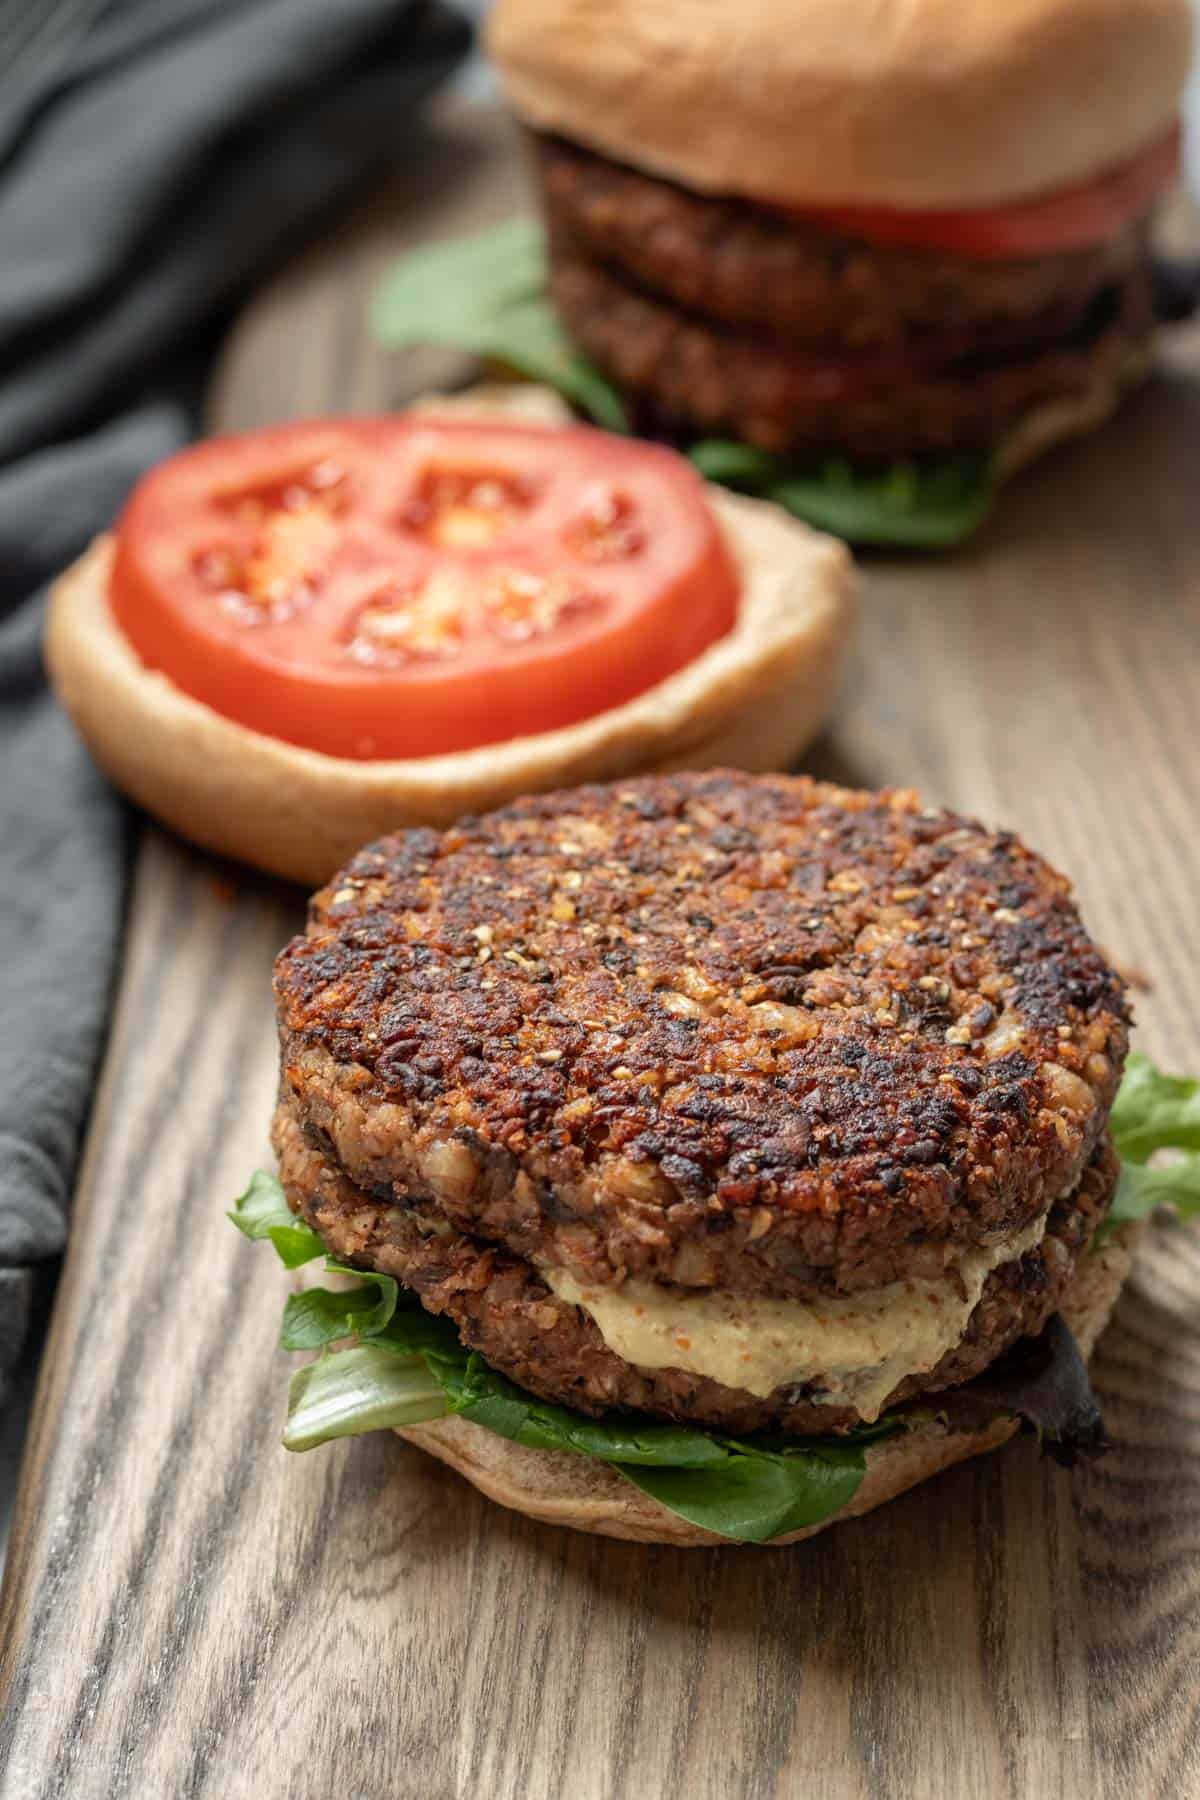 Open-face veggie burger with bun and tomato in background.